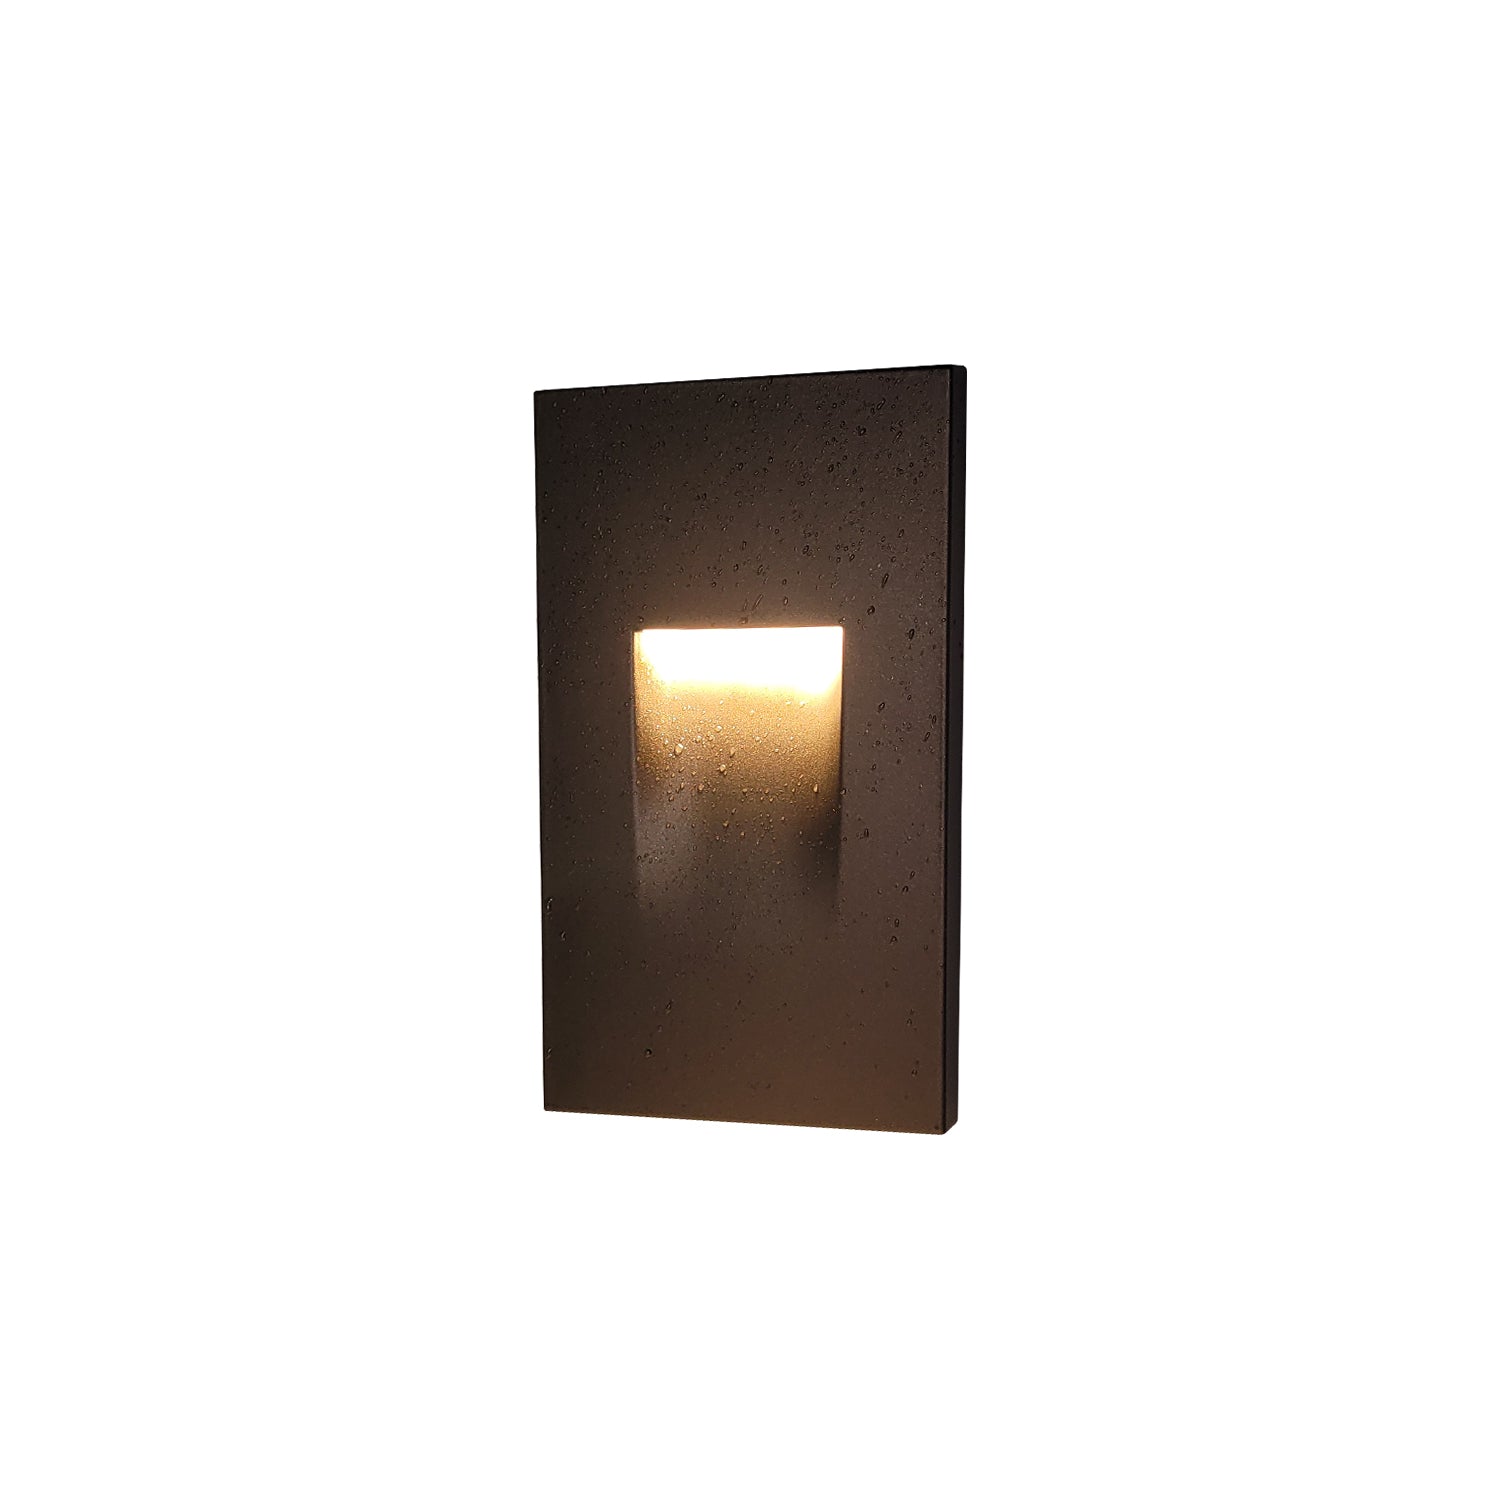 3.5W LED Aluminum Stair Light with oil-rubbed bronze finish, emitting warm white light downwards. Suitable for outdoor and indoor use, offering durable and waterproof lighting for stairs and steps.